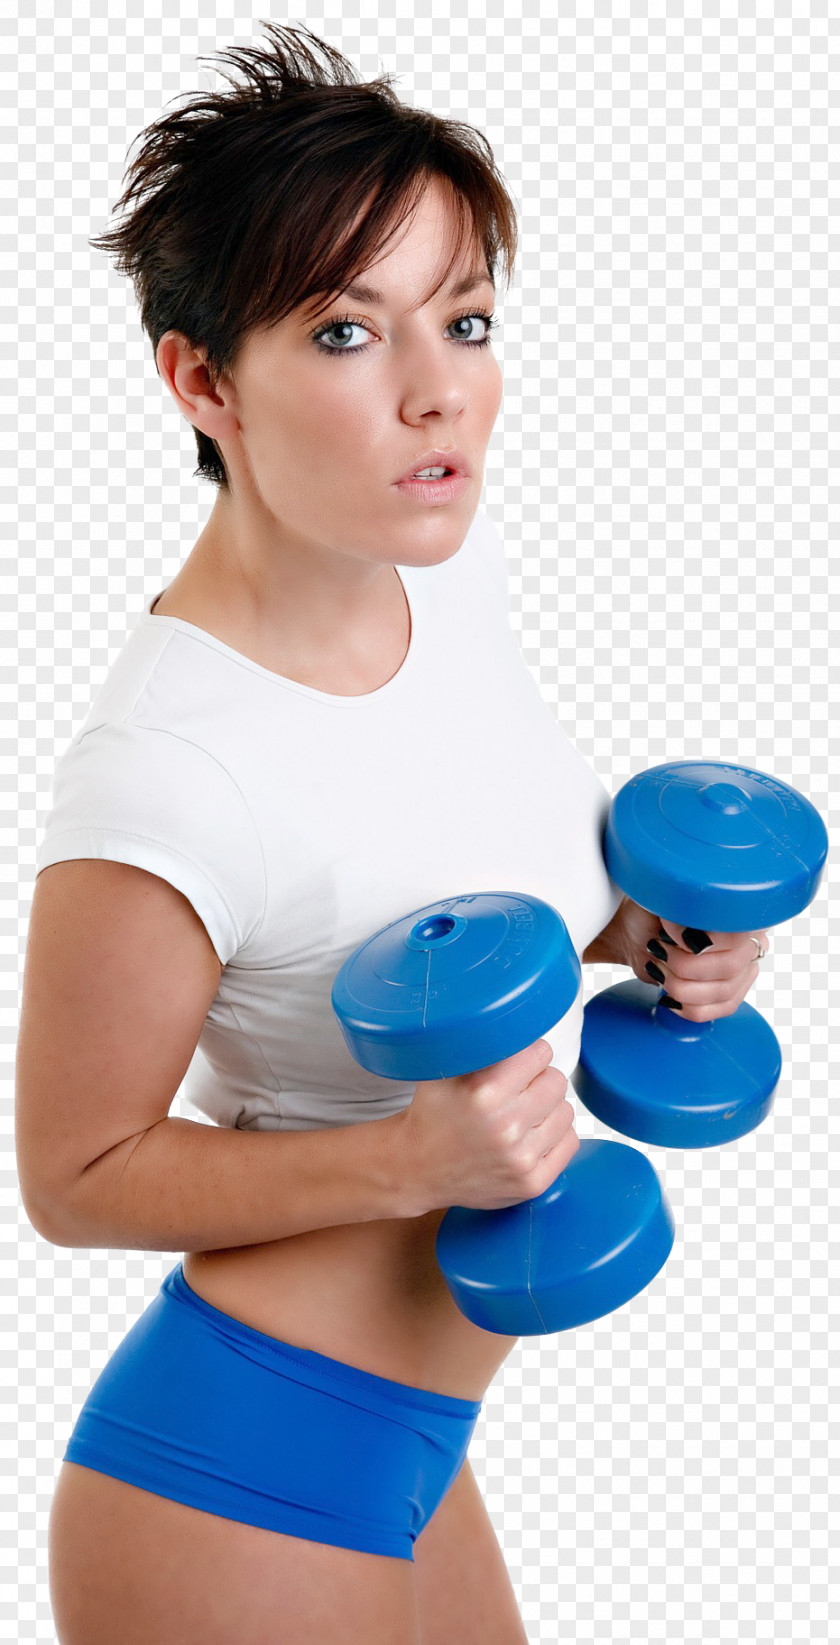 Fitness Studio Weight Training Exercise Dumbbell Physical Strength PNG